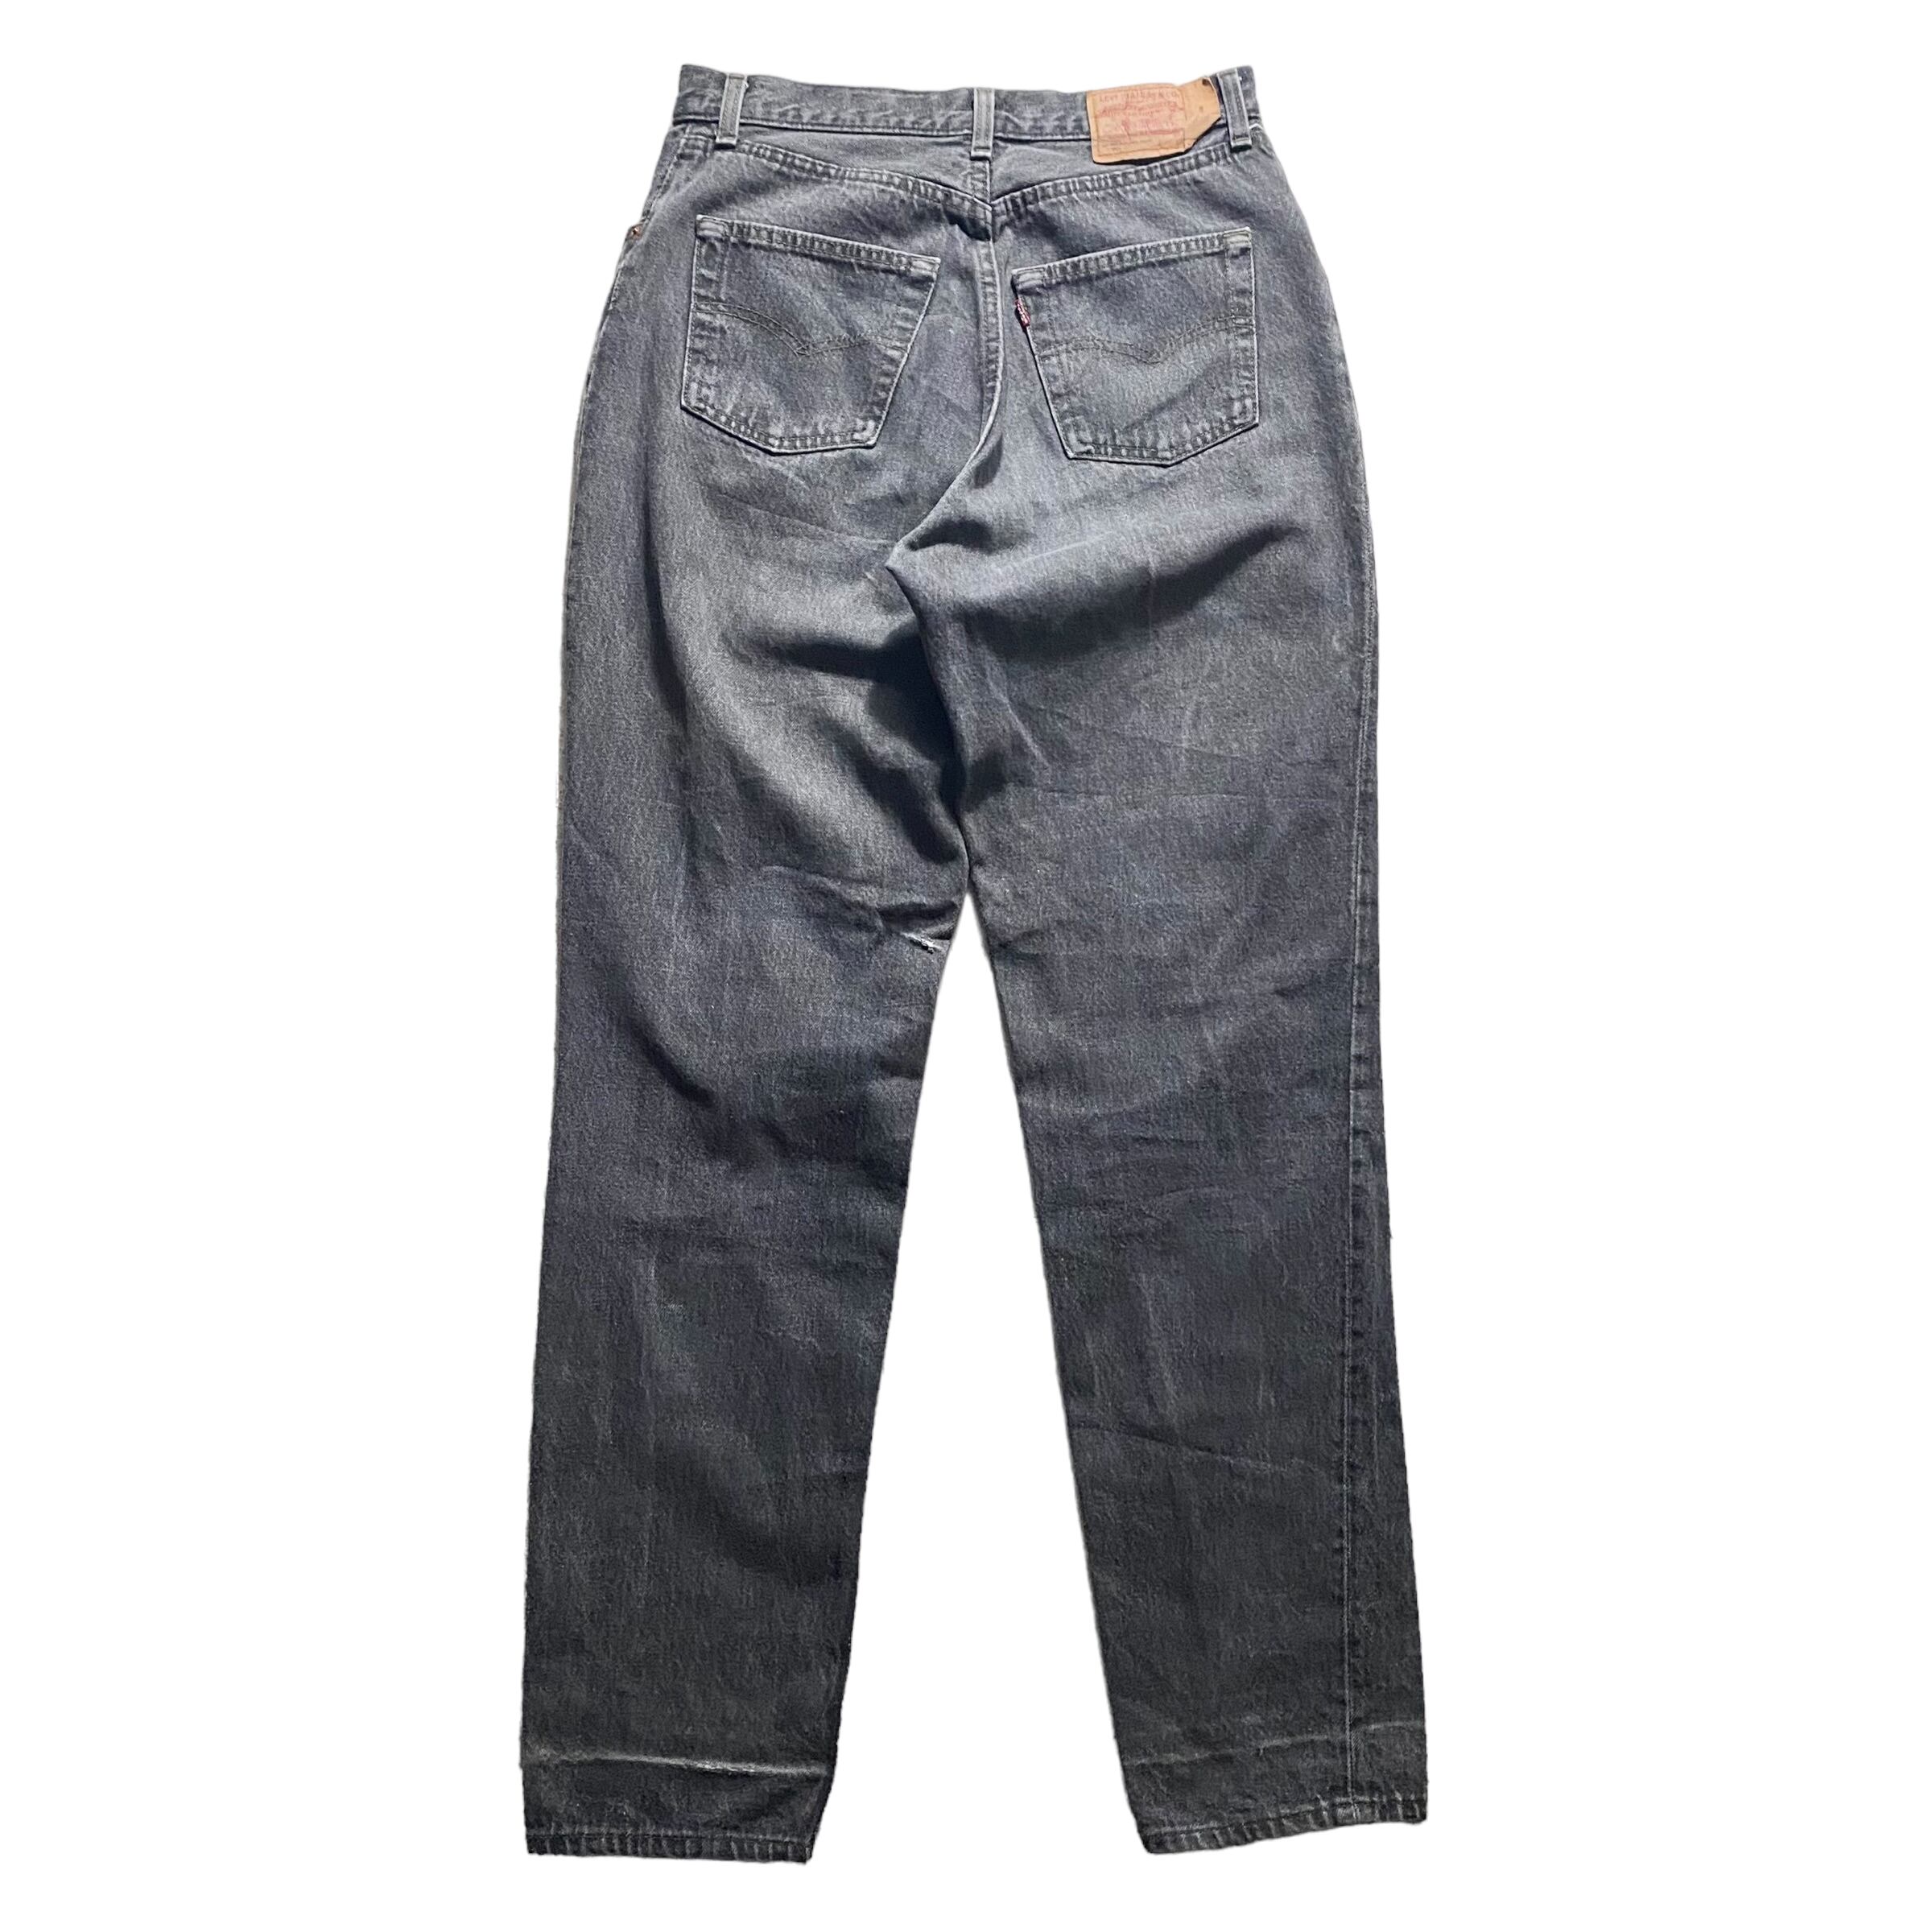 LEVI’S 901 black denim pants made in USA | NOIR ONLINE powered by BASE